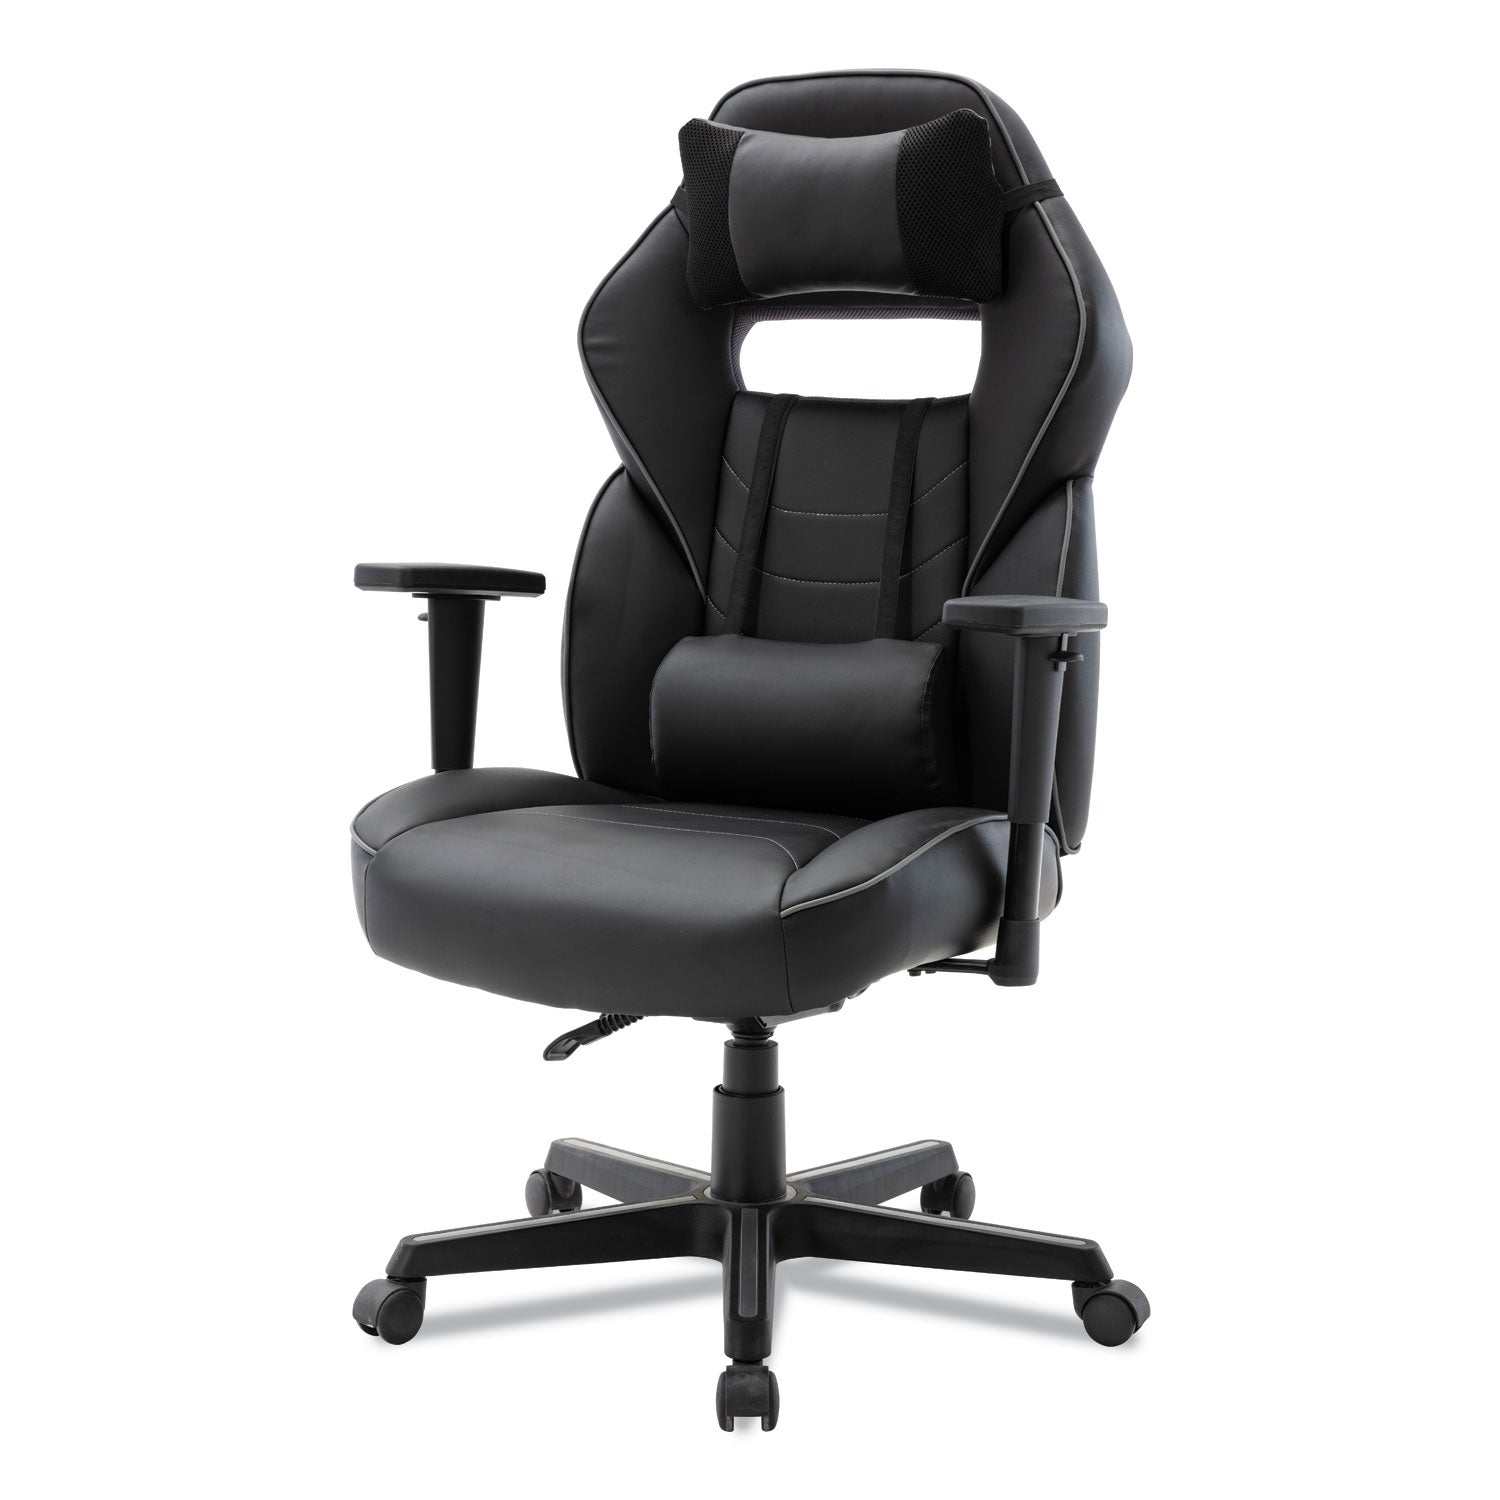 racing-style-ergonomic-gaming-chair-supports-275-lb-1591-to-198-seat-height-black-gray-trim-seat-back-black-gray-base_alegm4146 - 8